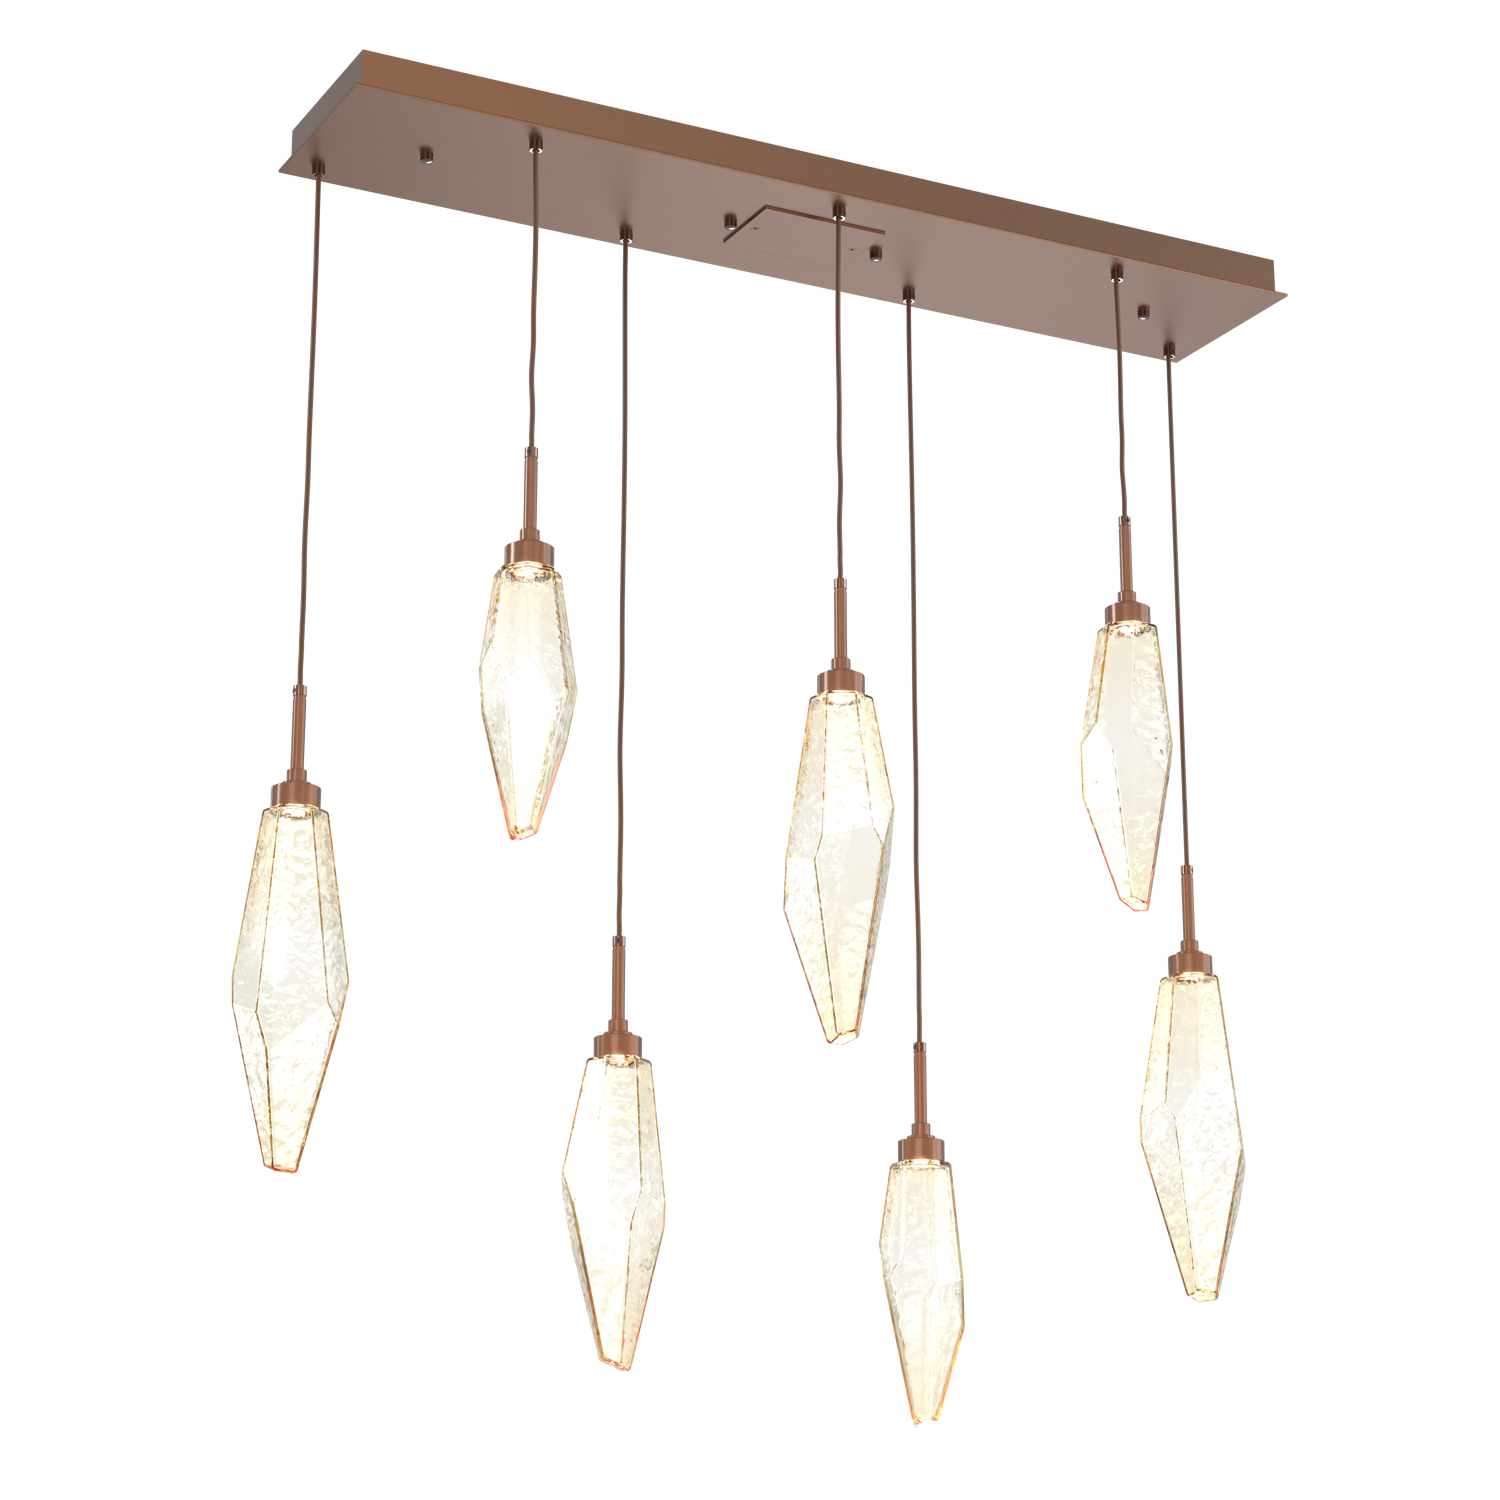 PLB0050-07-BB-CA-Hammerton-Studio-Rock-Crystal-7-light-linear-pendant-chandelier-with-burnished-bronze-finish-and-chilled-amber-blown-glass-shades-and-LED-lamping